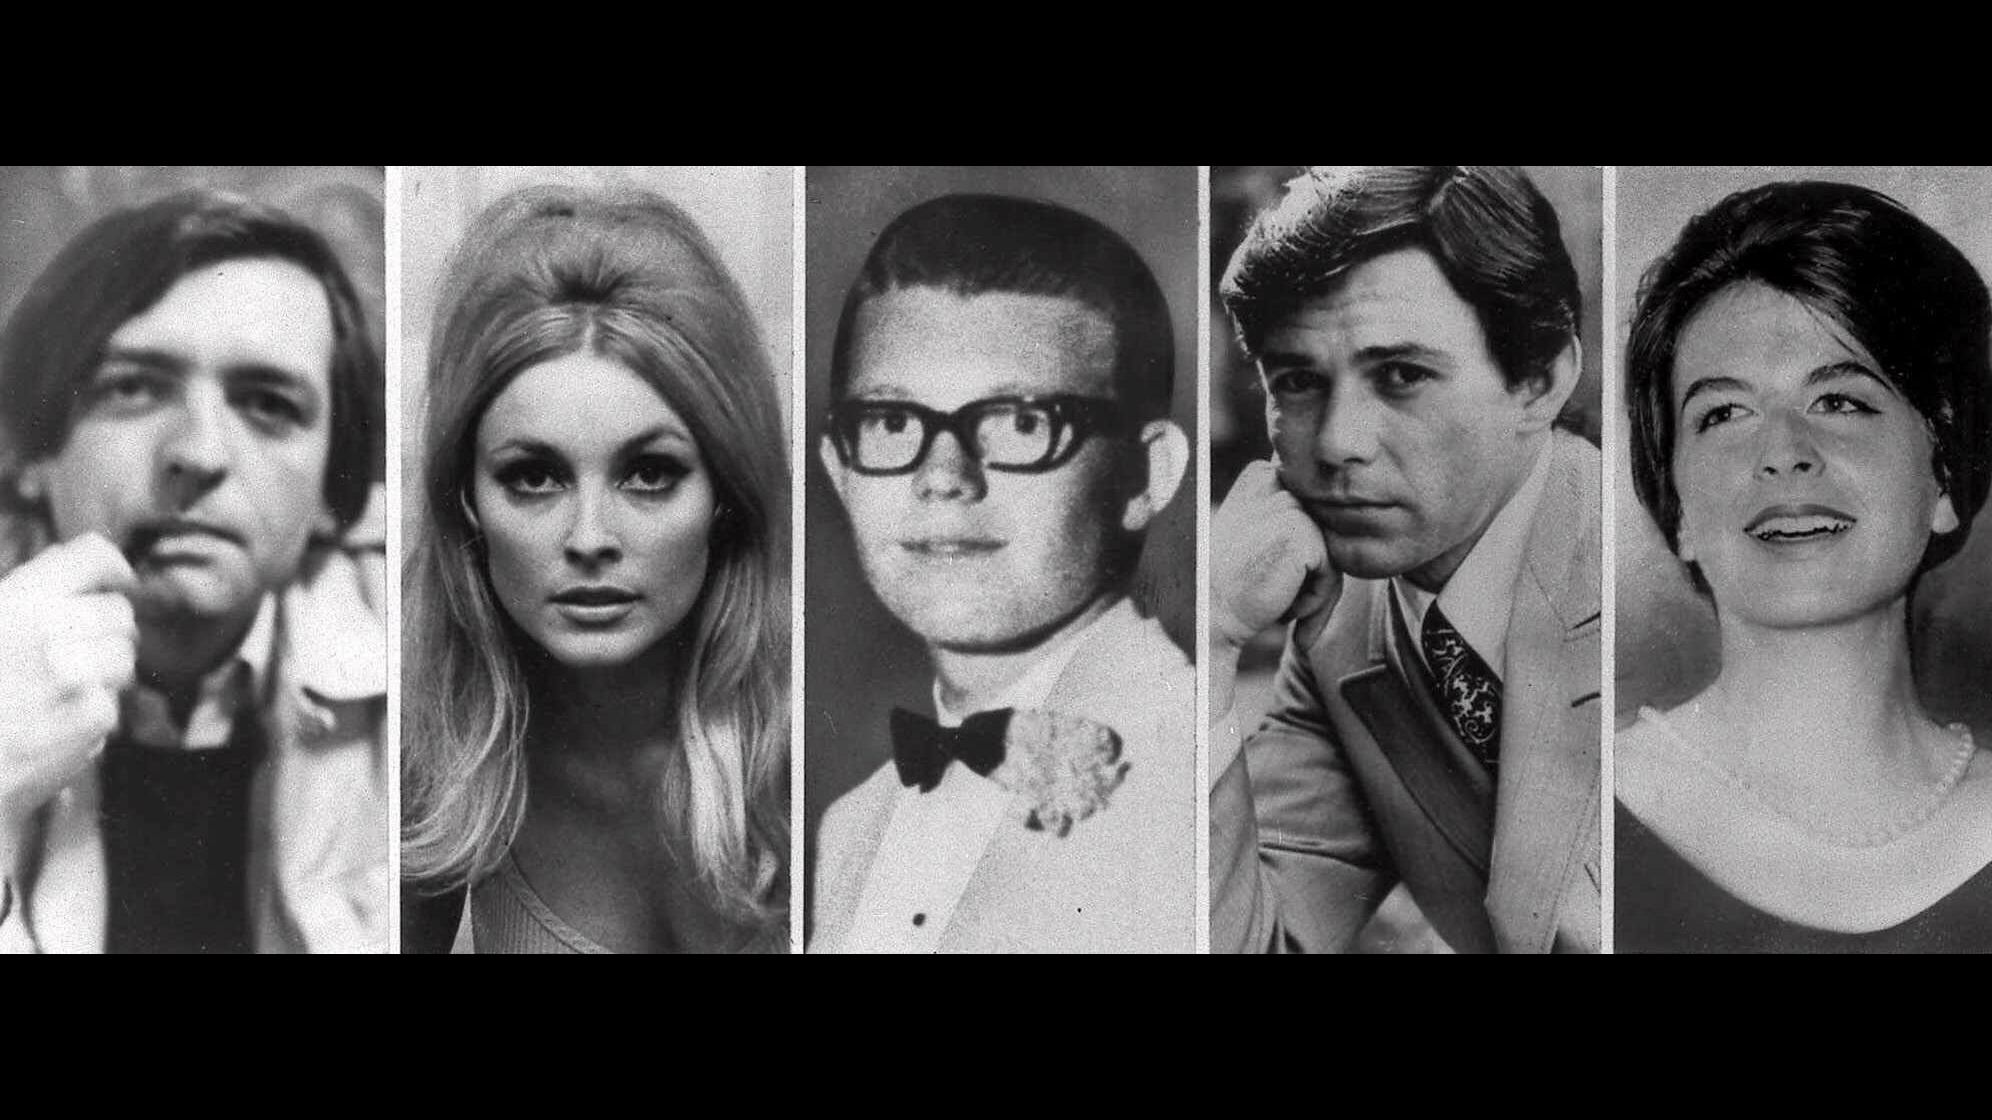 Manson family members: Where are they now | CNN